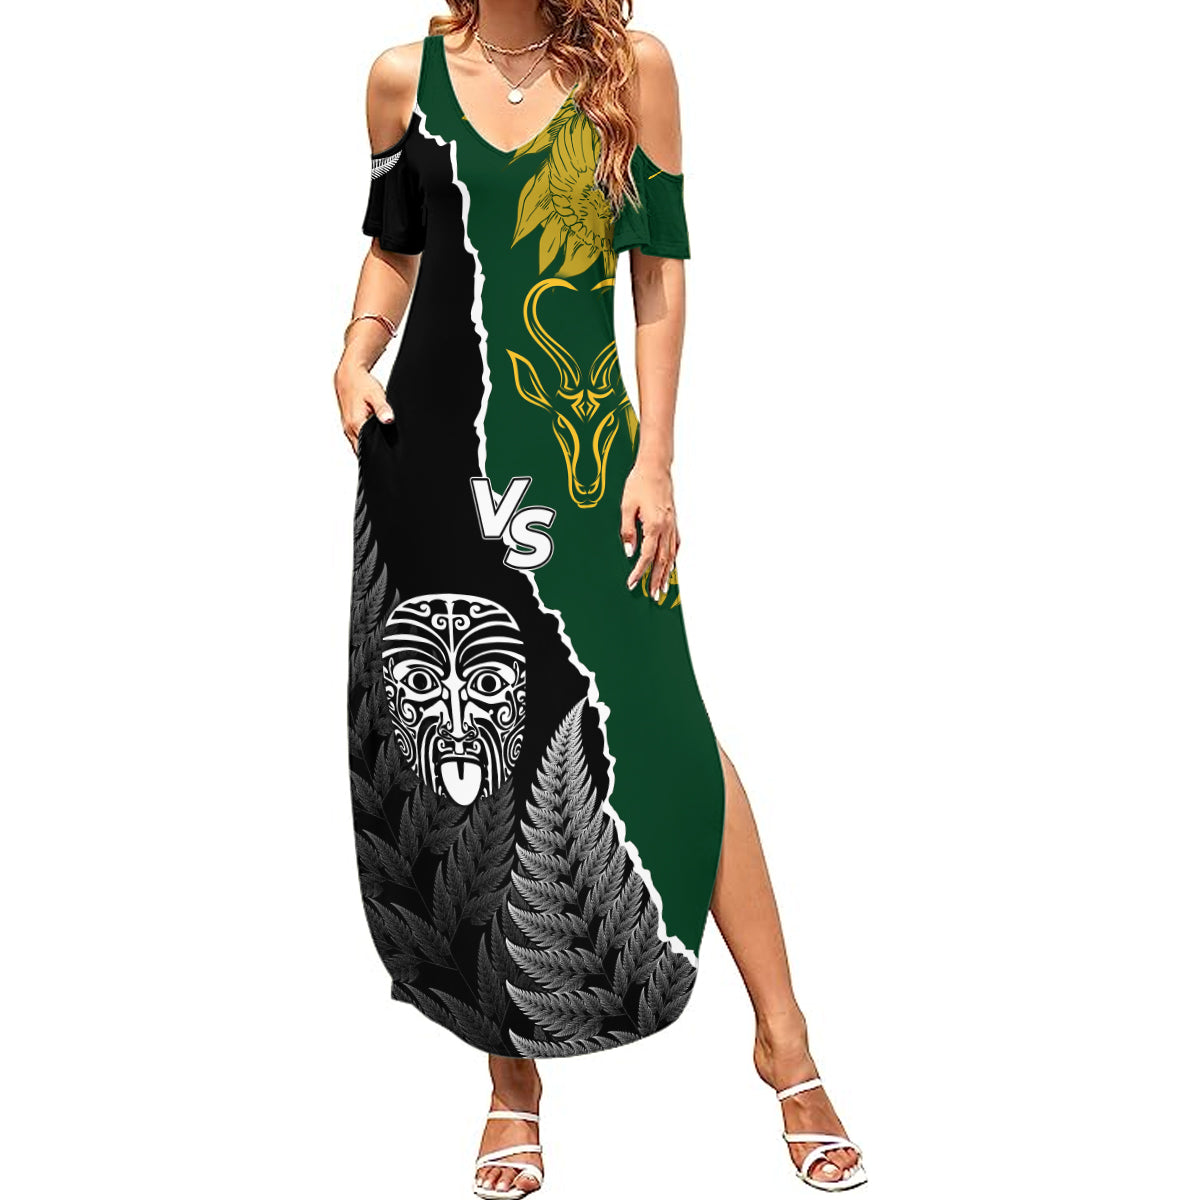 Personalised New Zealand Vs South Africa Rugby Summer Maxi Dress Rivals Dynamics LT7 Women Black Green - Polynesian Pride